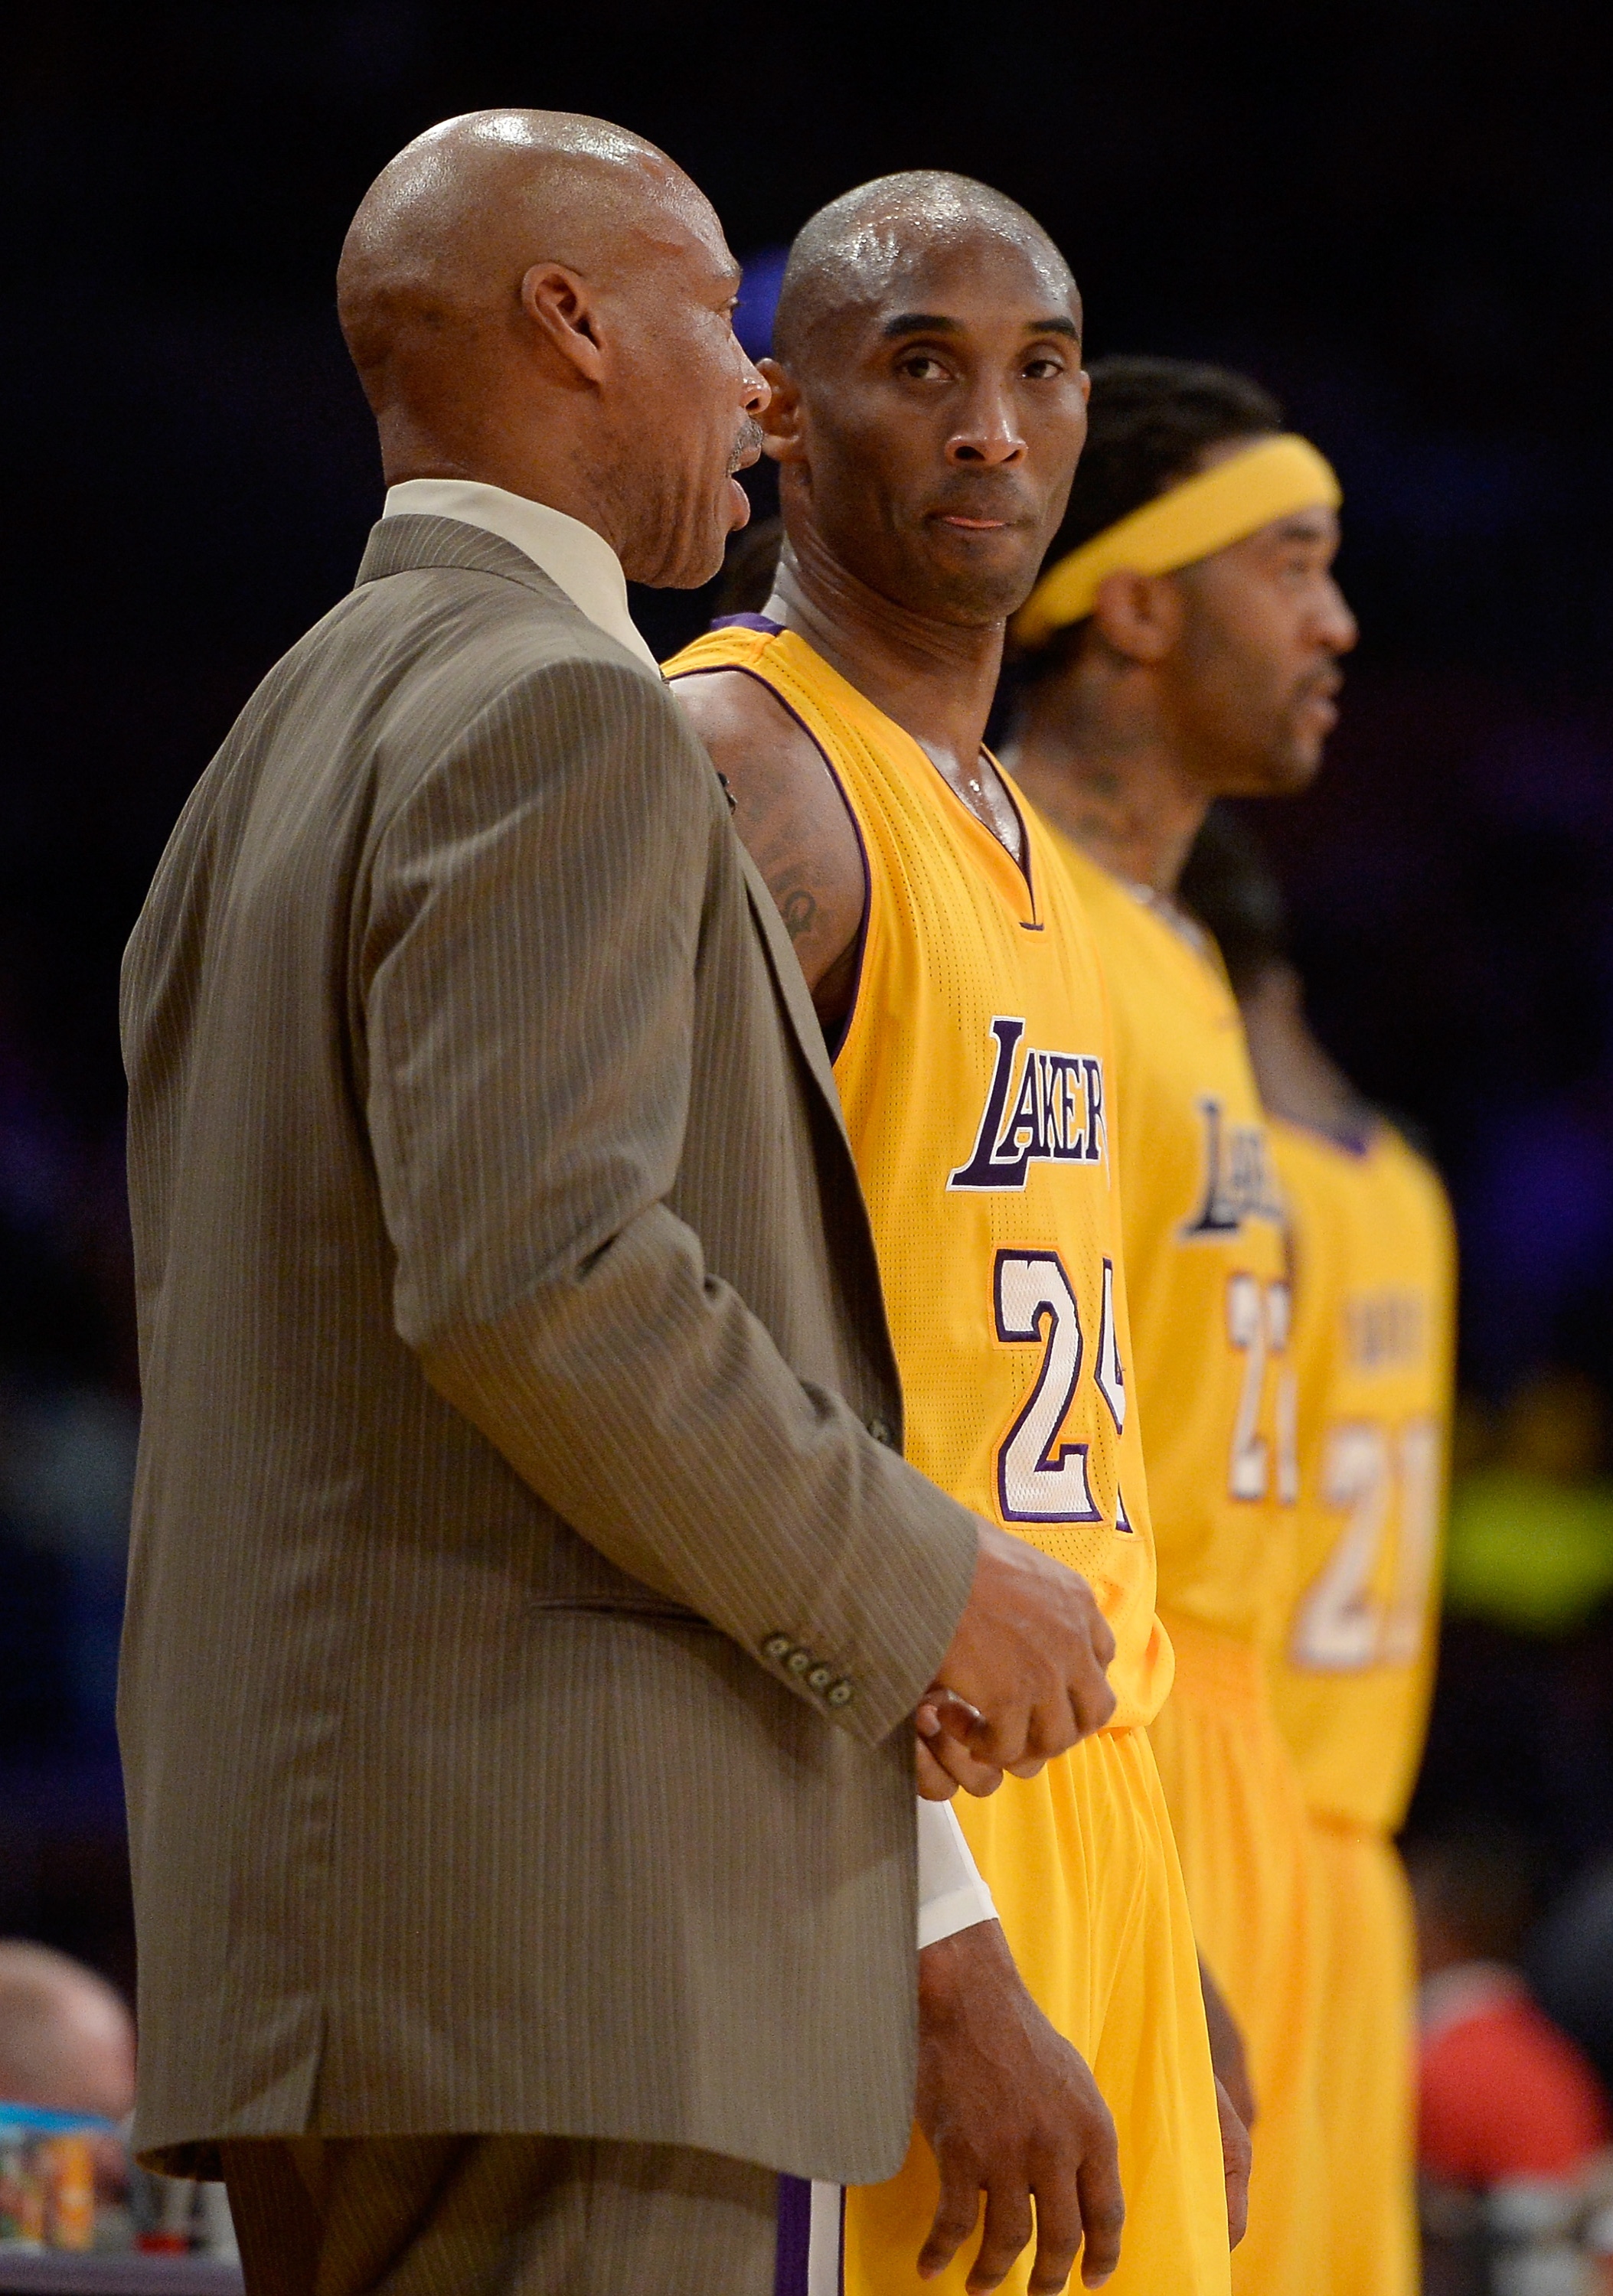 LOS ANGELES, CA - JANUARY 15:  Kobe Bryant #24 of the Los Angeles Lakers talks with Head Coach Byron Scott during a 109-102 loss to the Cleveland Cavaliers at Staples Center on January 15, 2015 in Los Angeles, California.  NOTE TO USER: User expressly acknowledges and agrees that, by downloading and or using this Photograph, user is consenting to the terms and condition of the Getty Images License Agreement.  (Photo by Harry How/Getty Images)